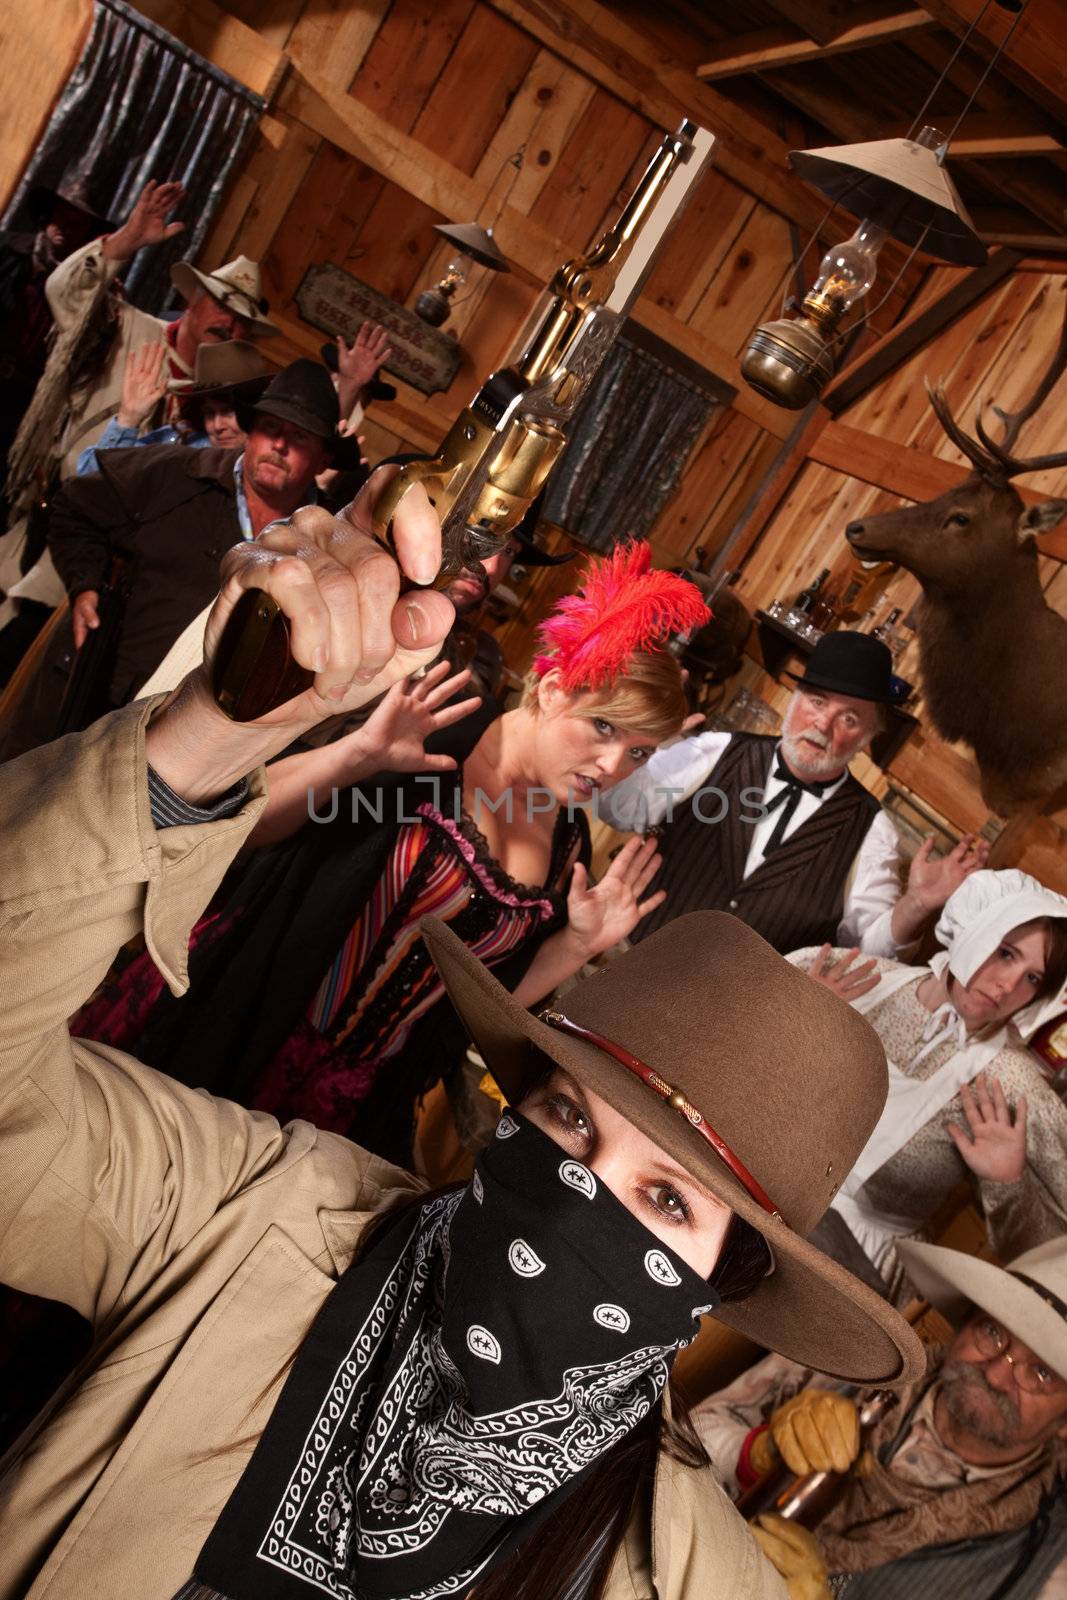 Dangerous female bandit holds up people in old west saloon